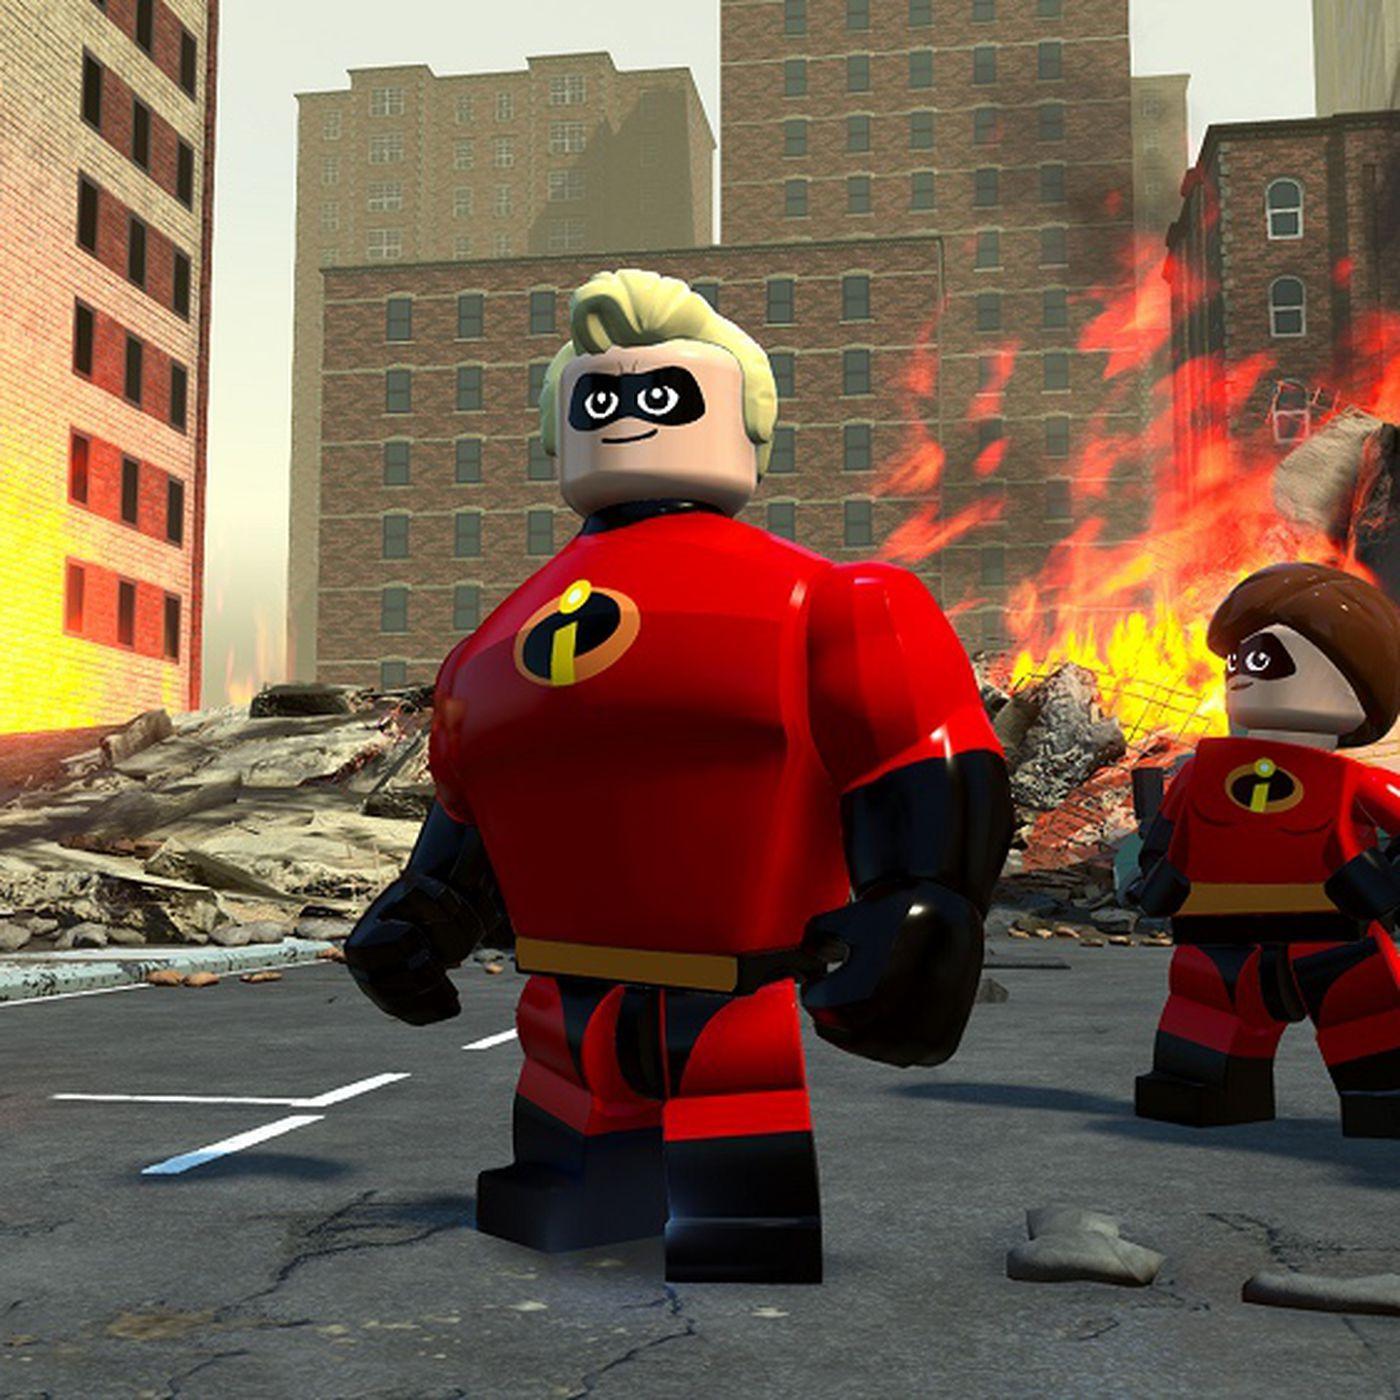 Lego The Incredibles game coming in June